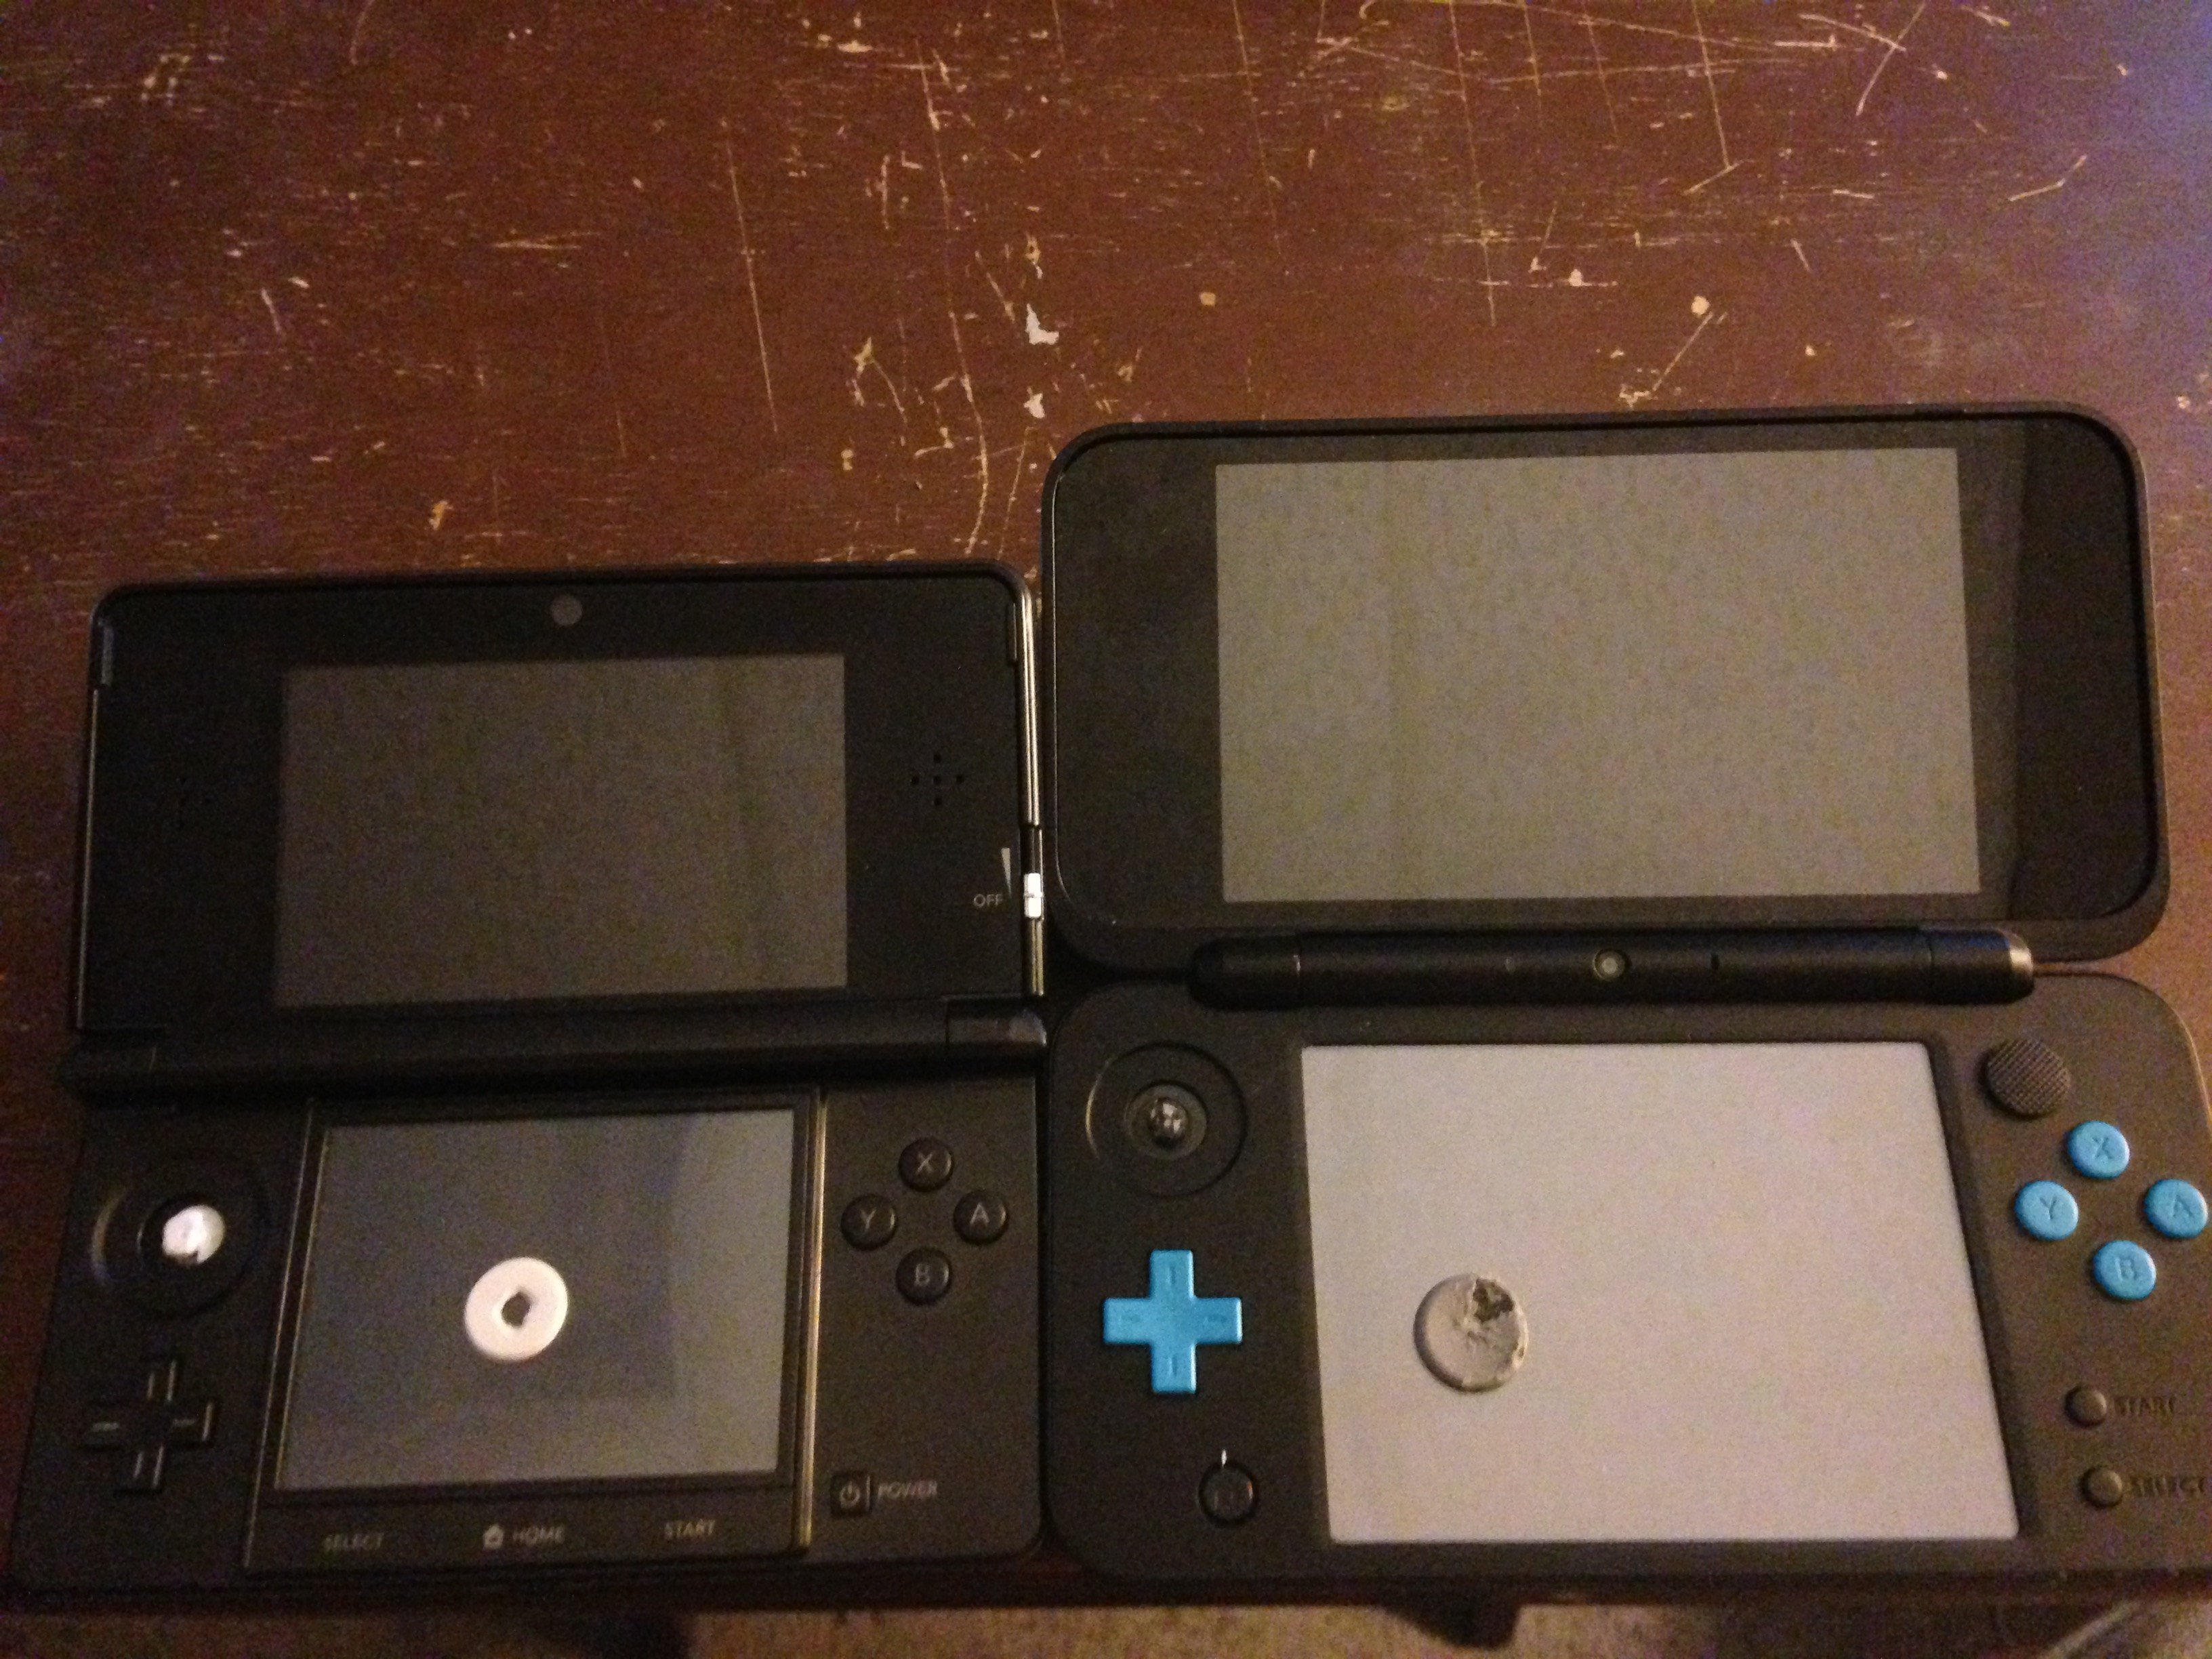 New 2DS XL Circle Pad broken off - any option to replace without opening  the system? | GBAtemp.net - The Independent Video Game Community